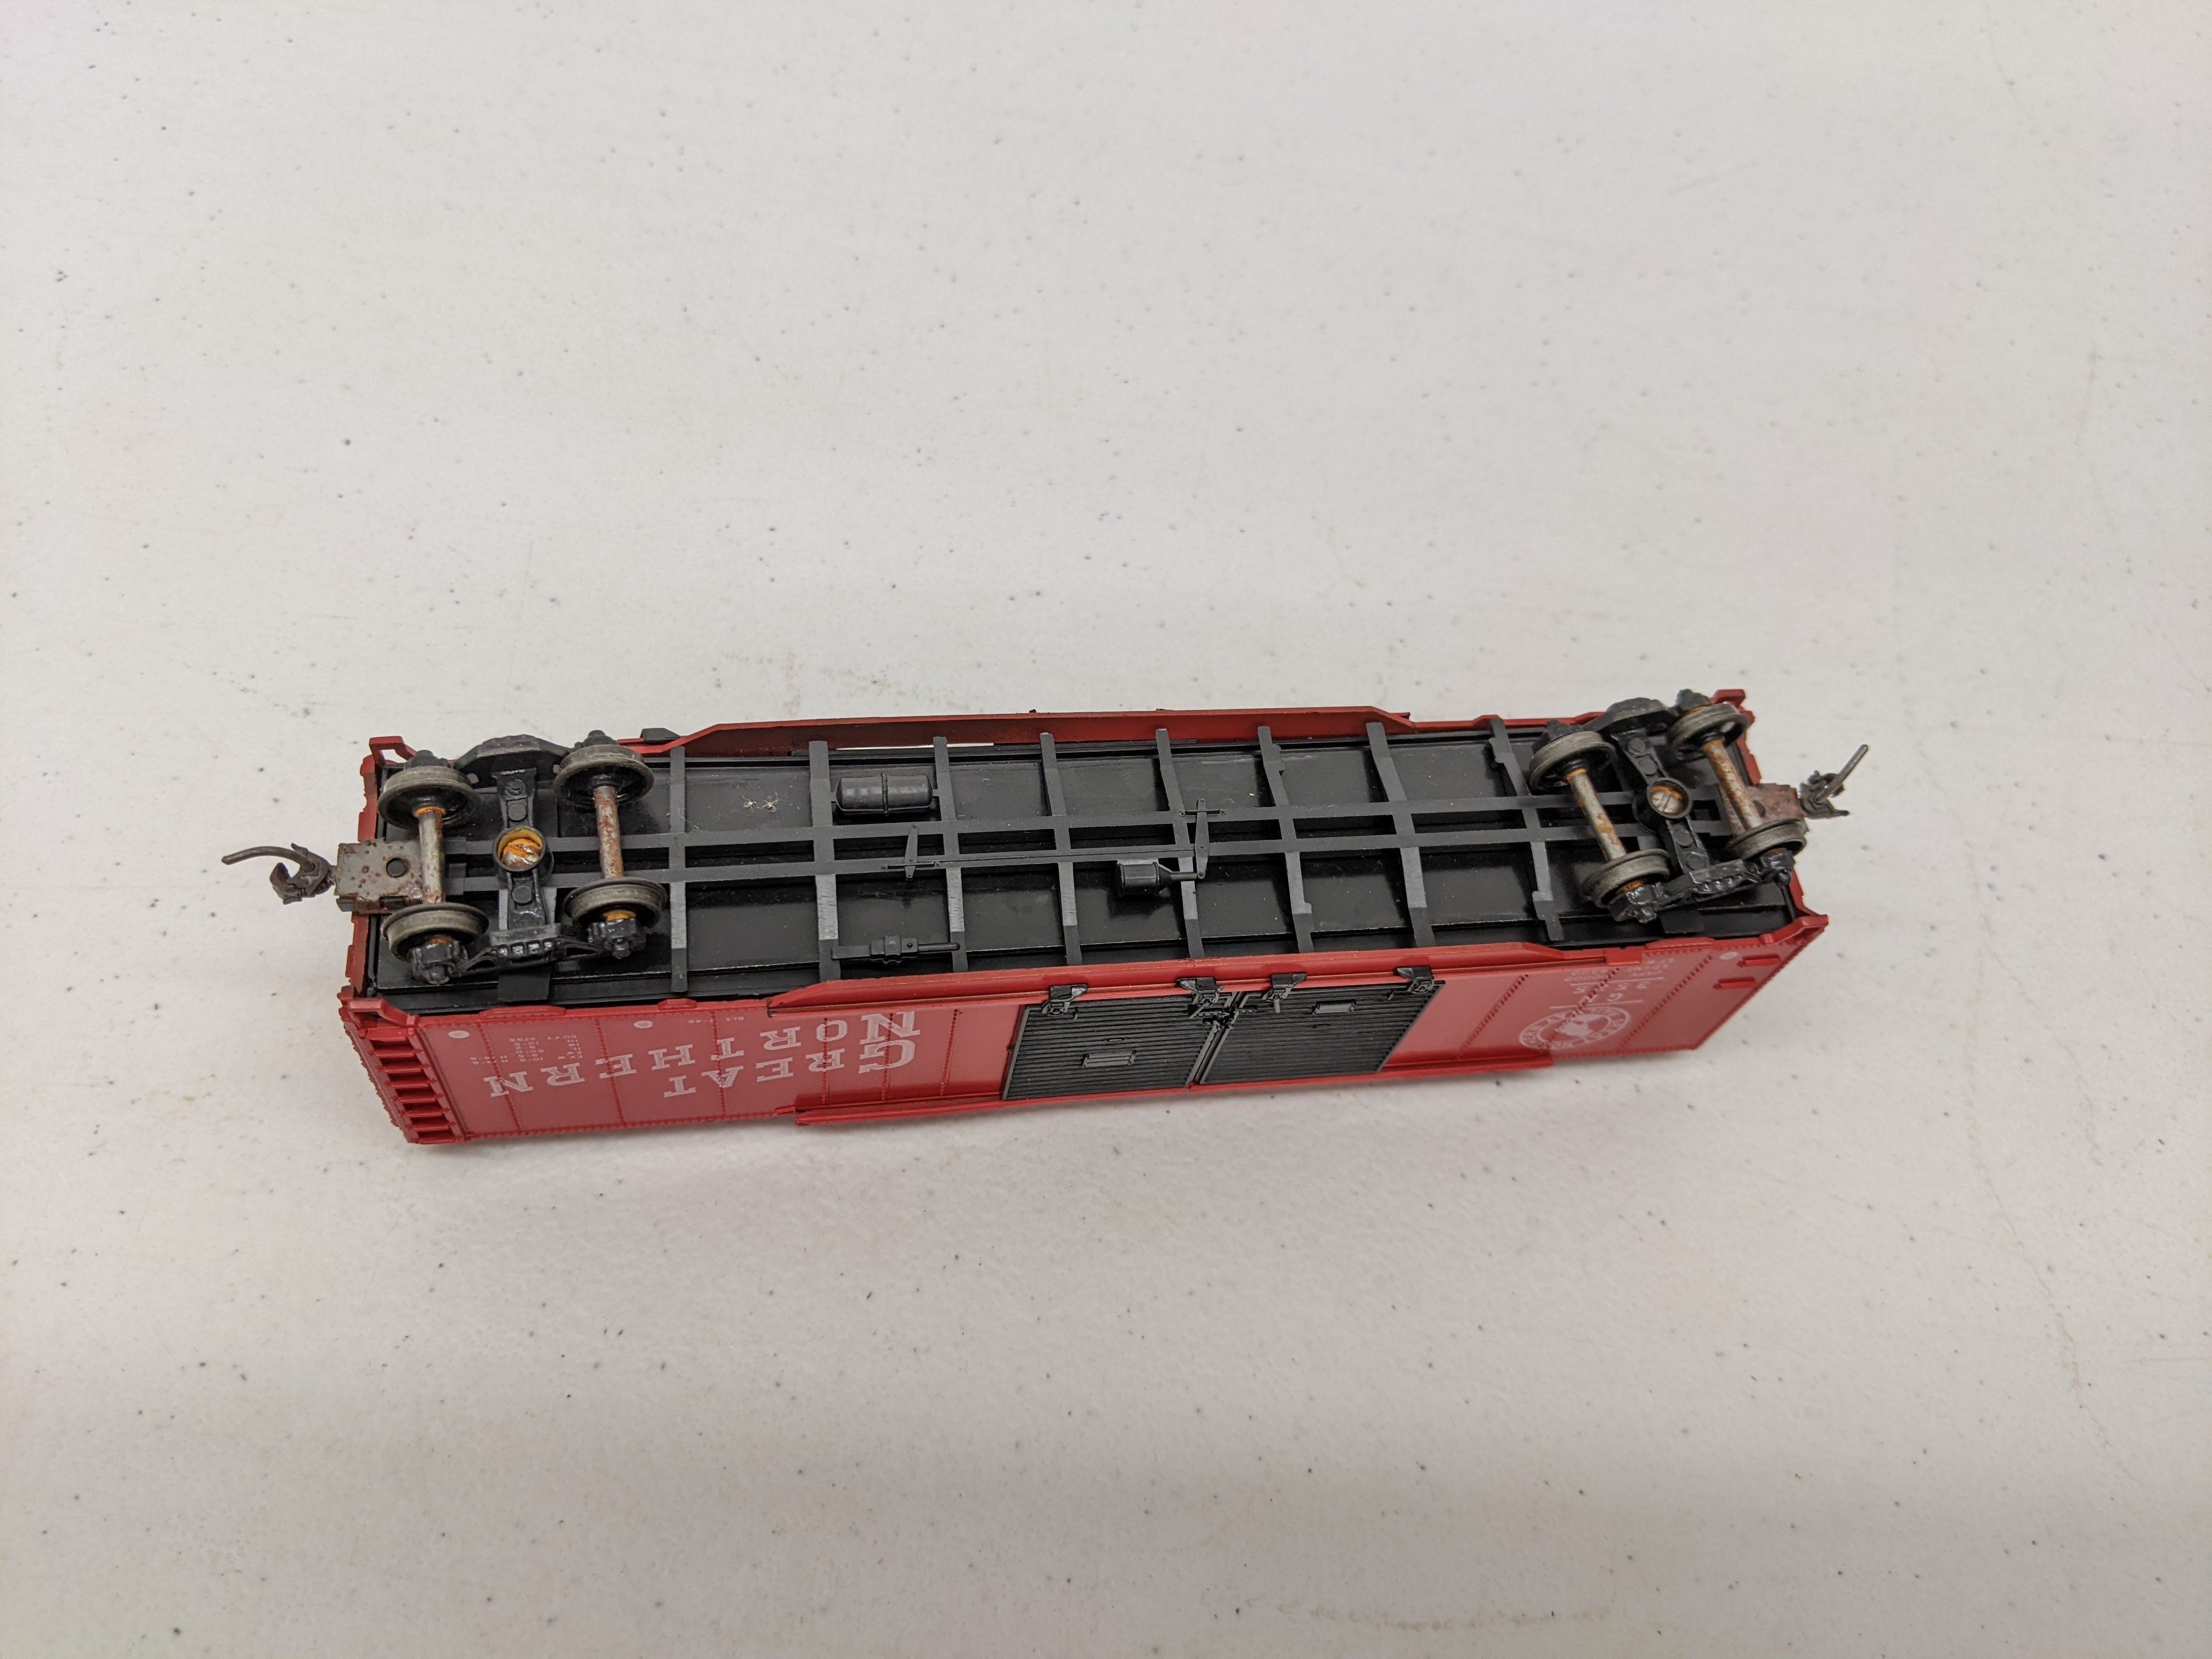 USED Athearn HO Scale, 50' Double Door Box Car, Great Northern GN #3525